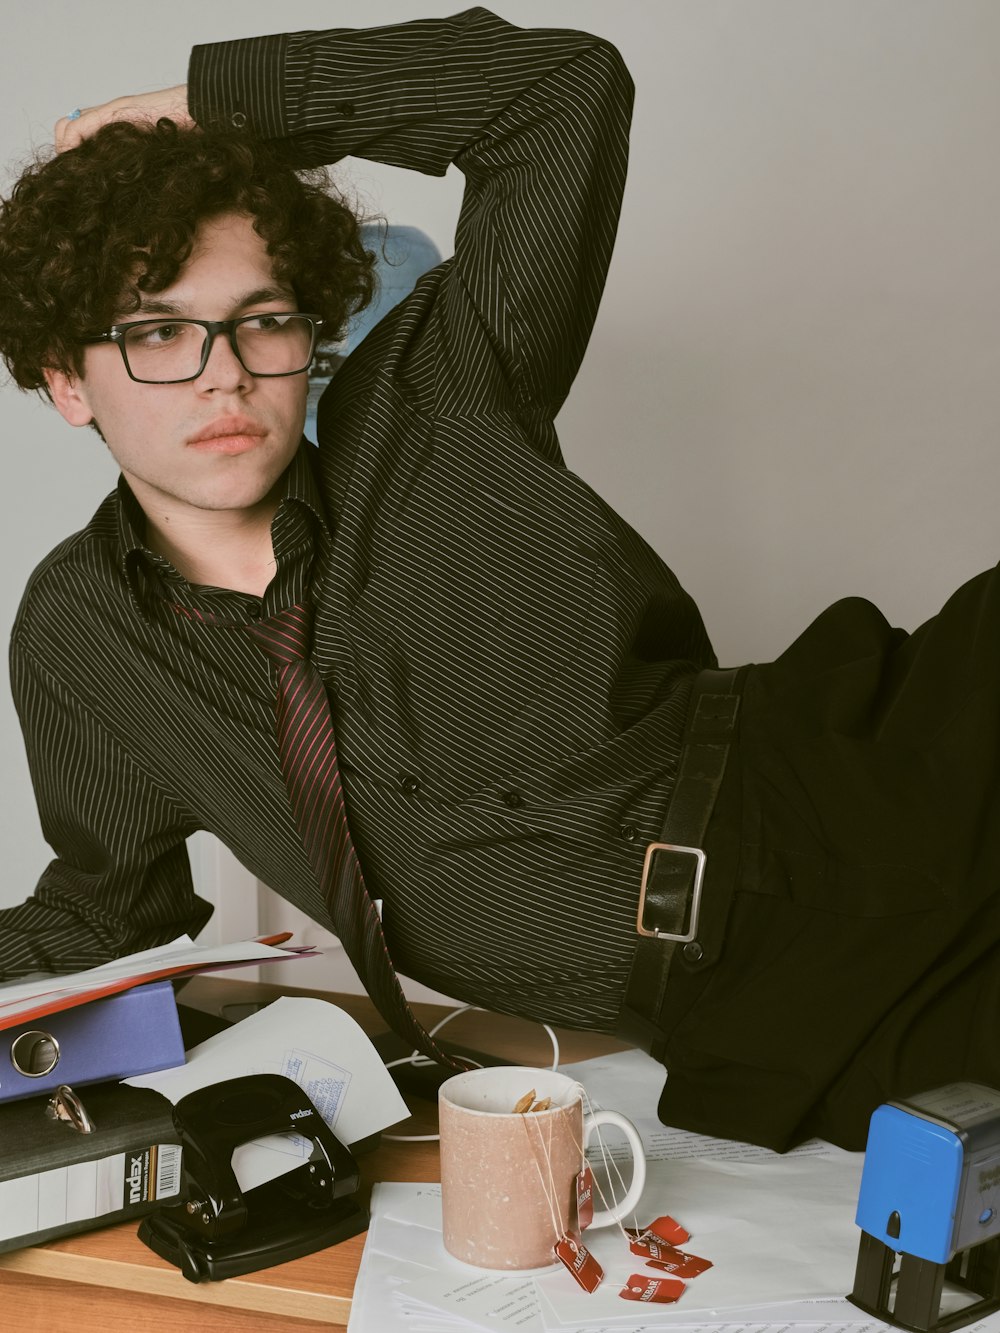 a young man with curly hair and glasses sitting at a desk